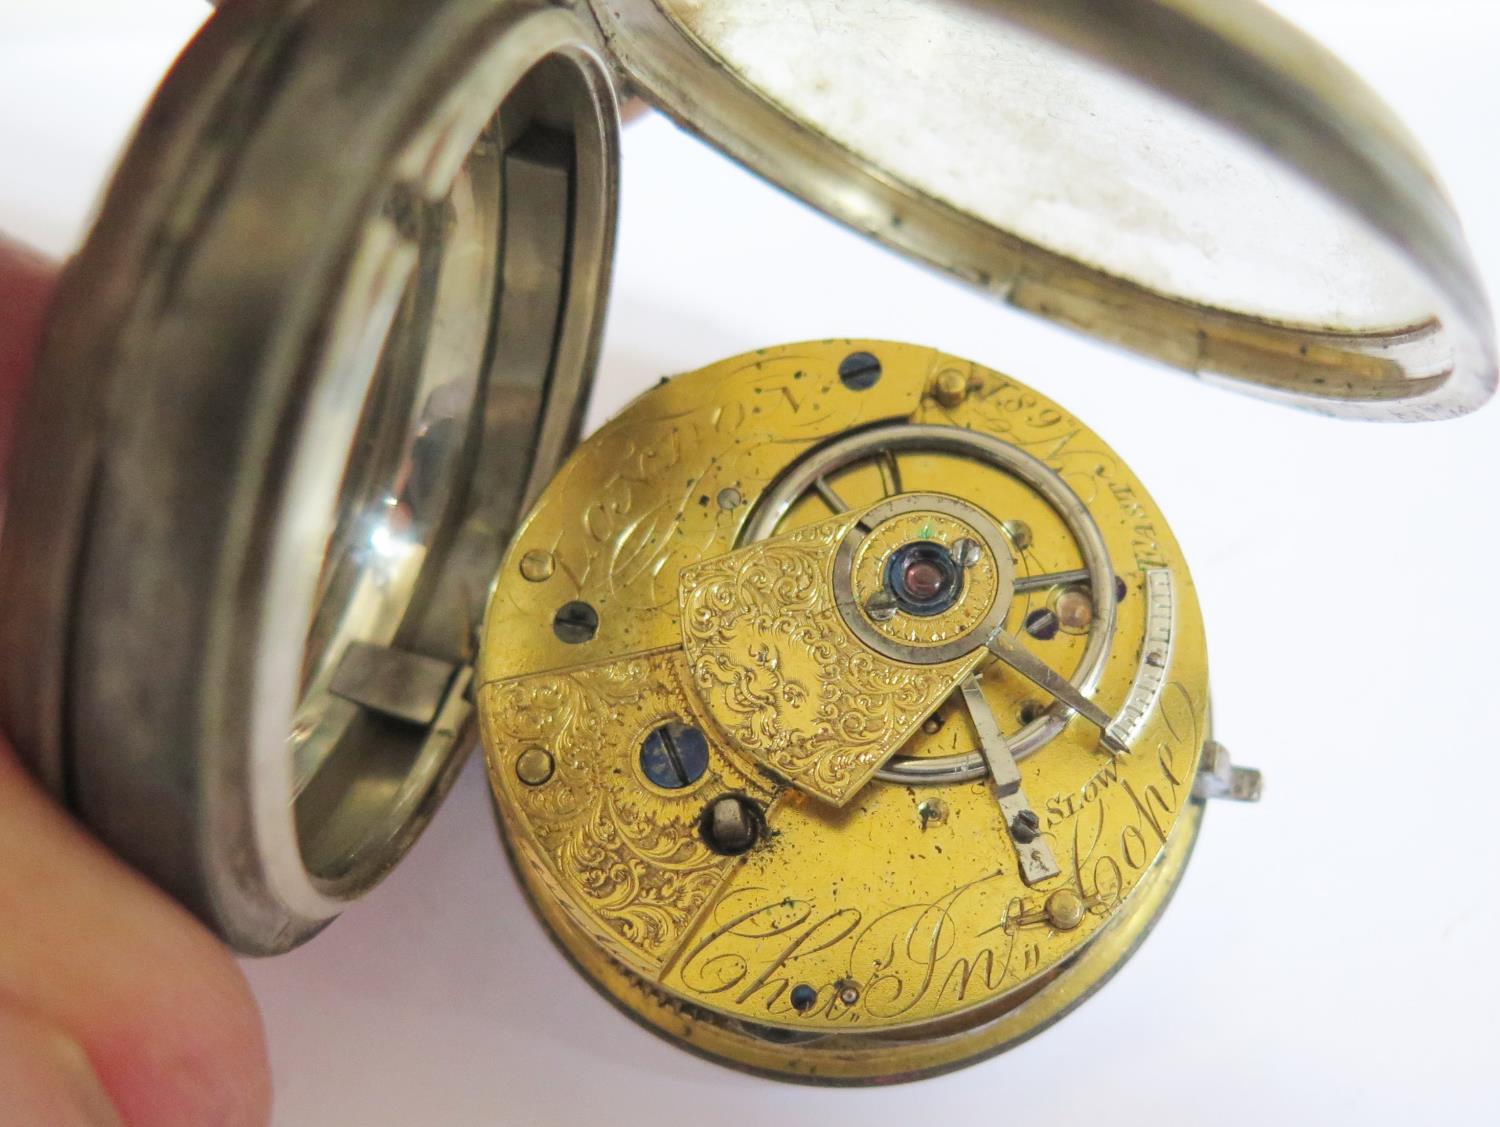 Charles John Cope (active 1815-30) Open Dial Pocket Watch with chain driven fusee movement no. 681 - Image 2 of 2